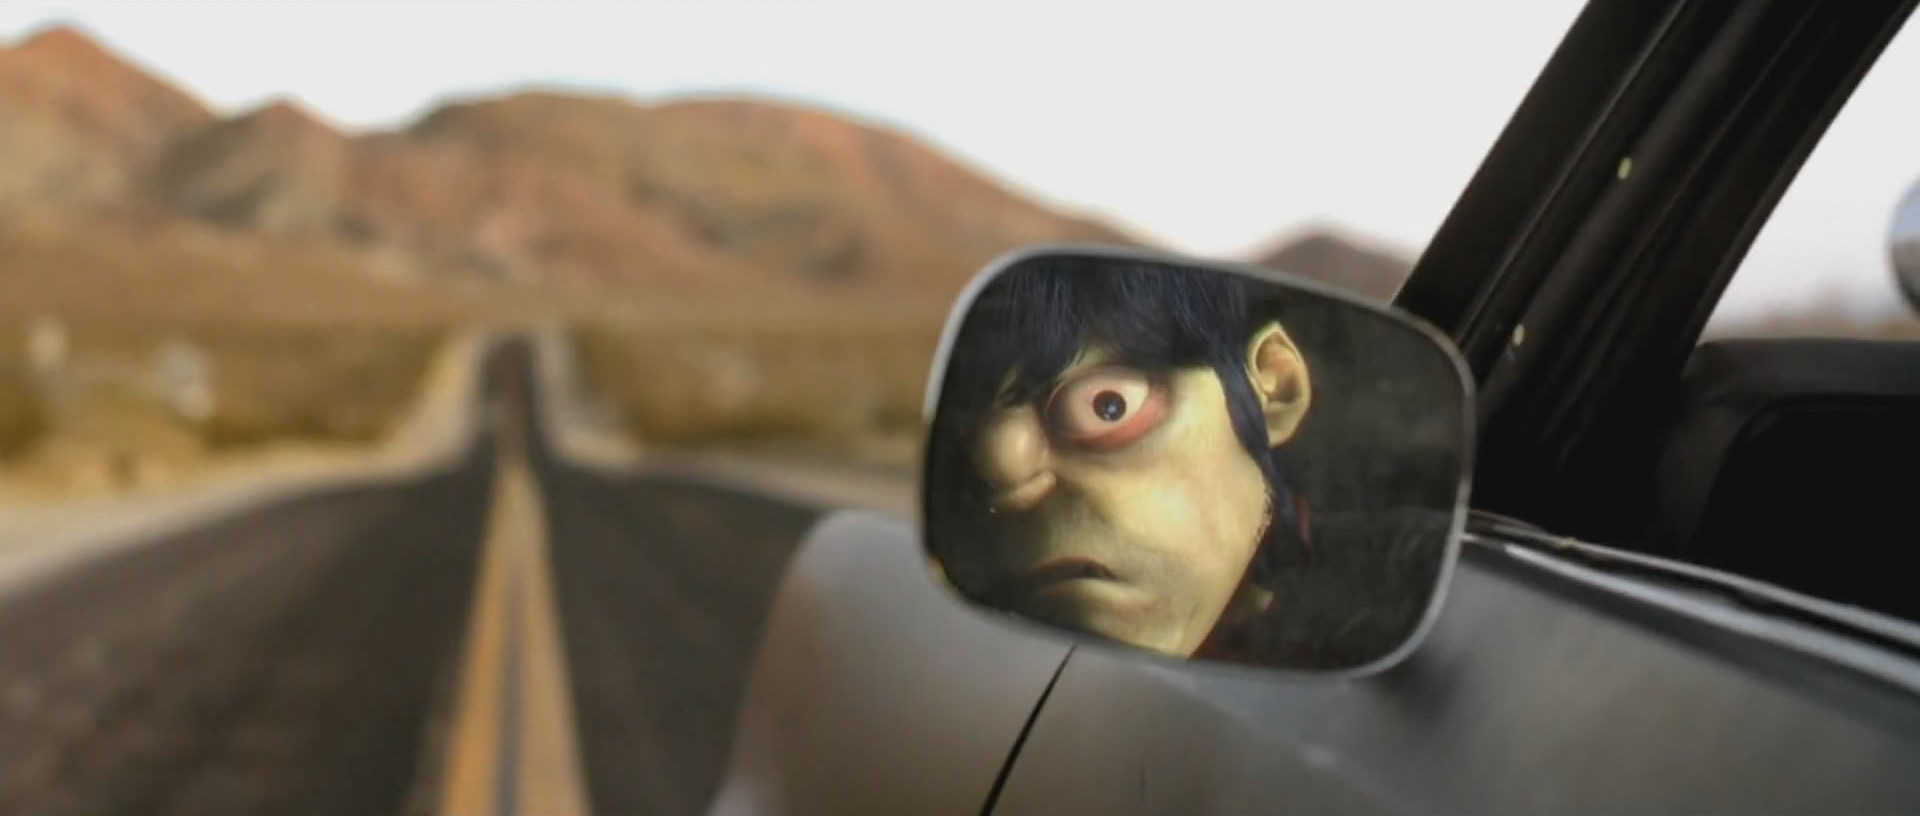 Twisted Music Video of the Week Vol. 234: Gorillaz "Stylo" - Bloody  Disgusting